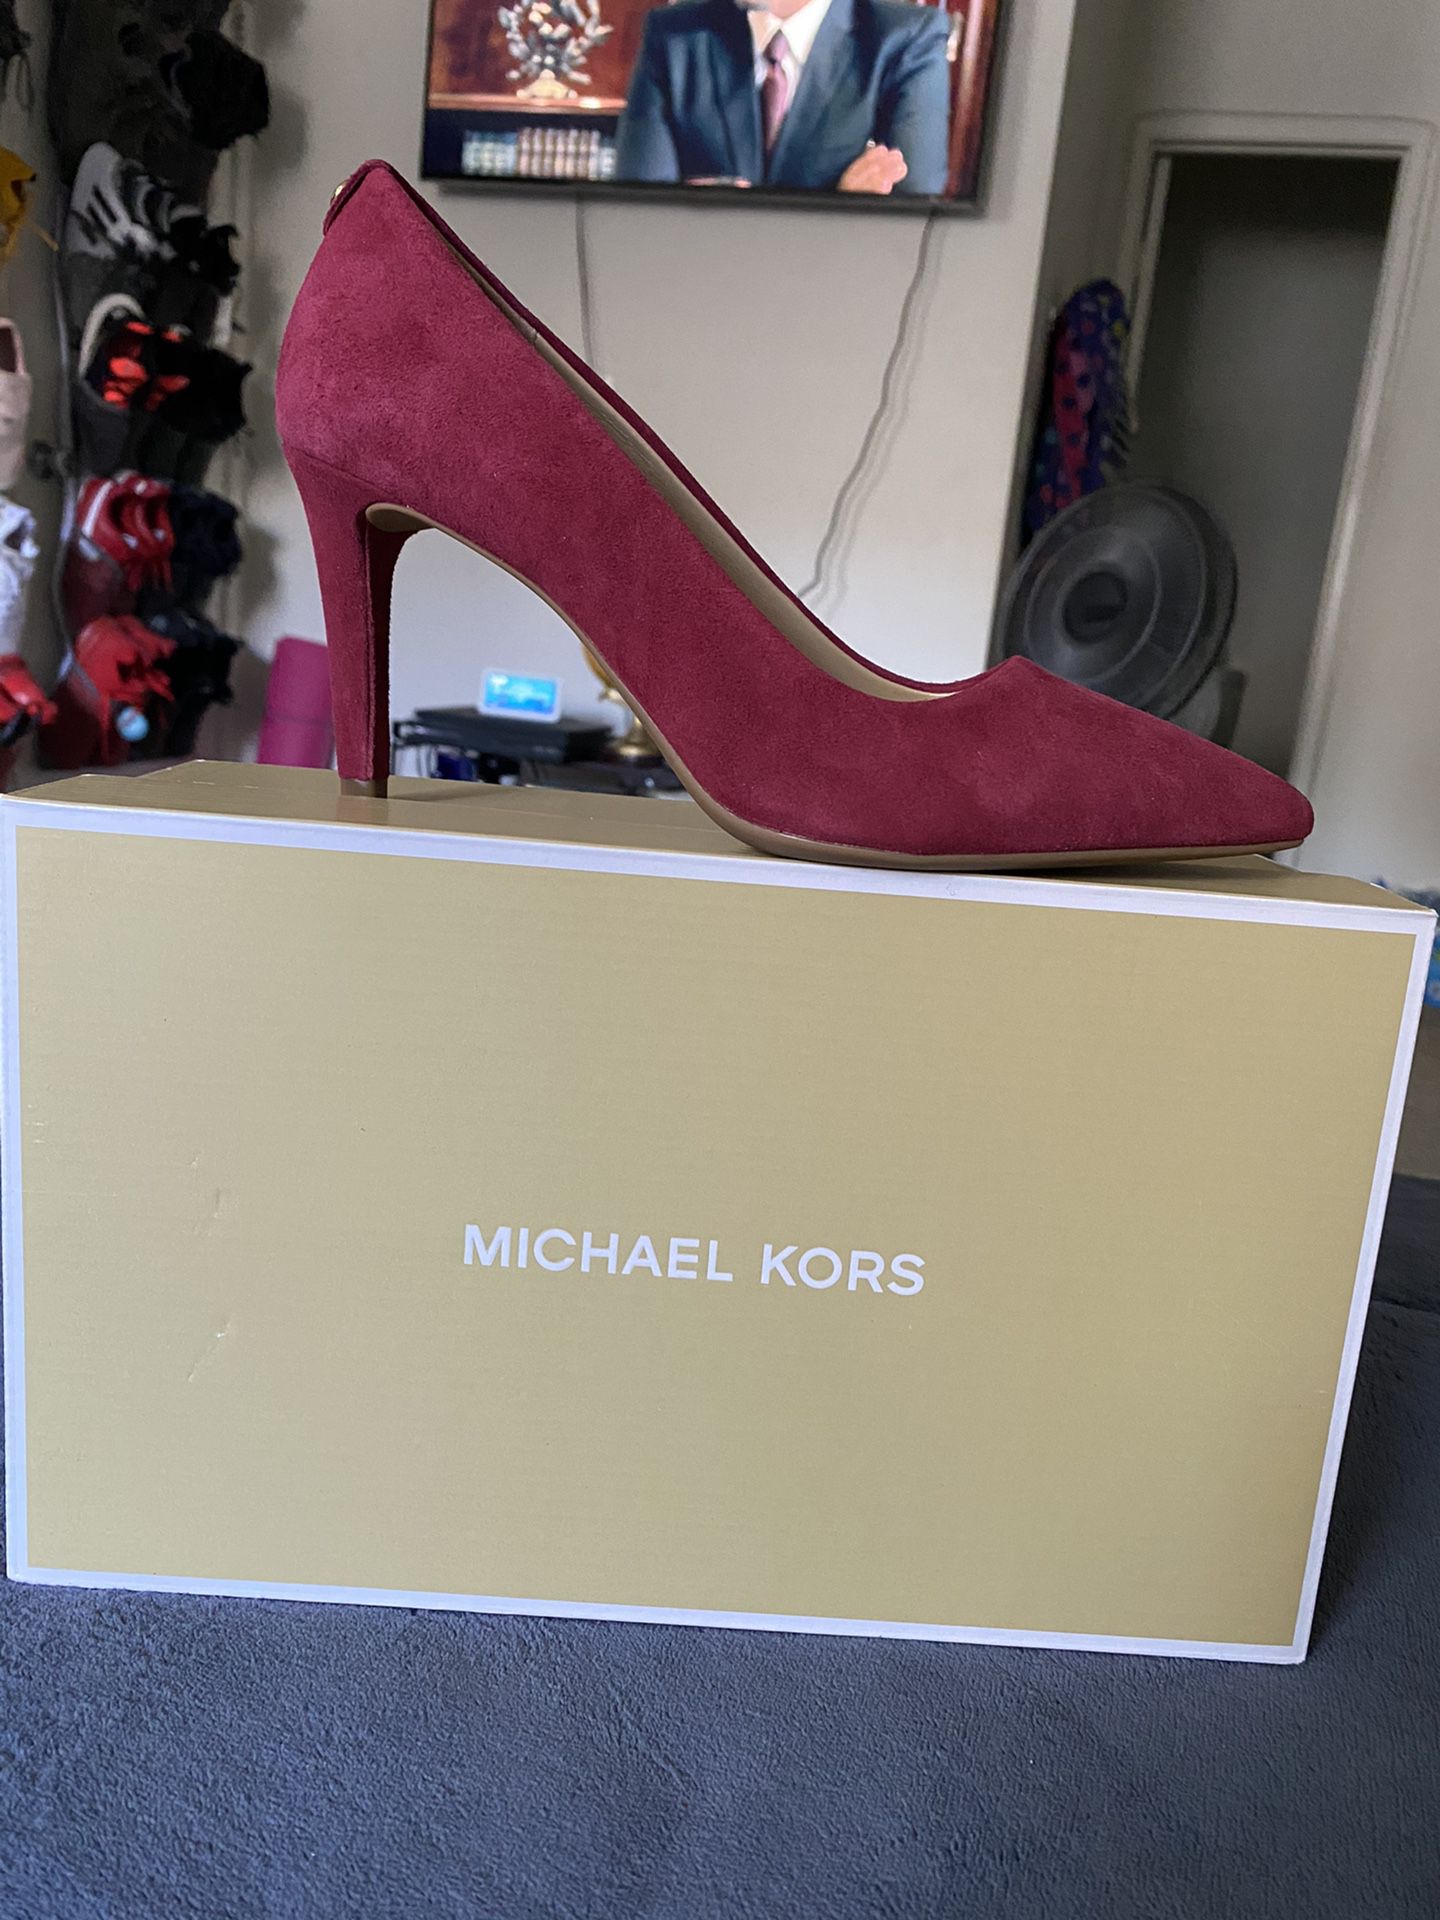 Michael Kors heels size 6 and 8 1/2 available